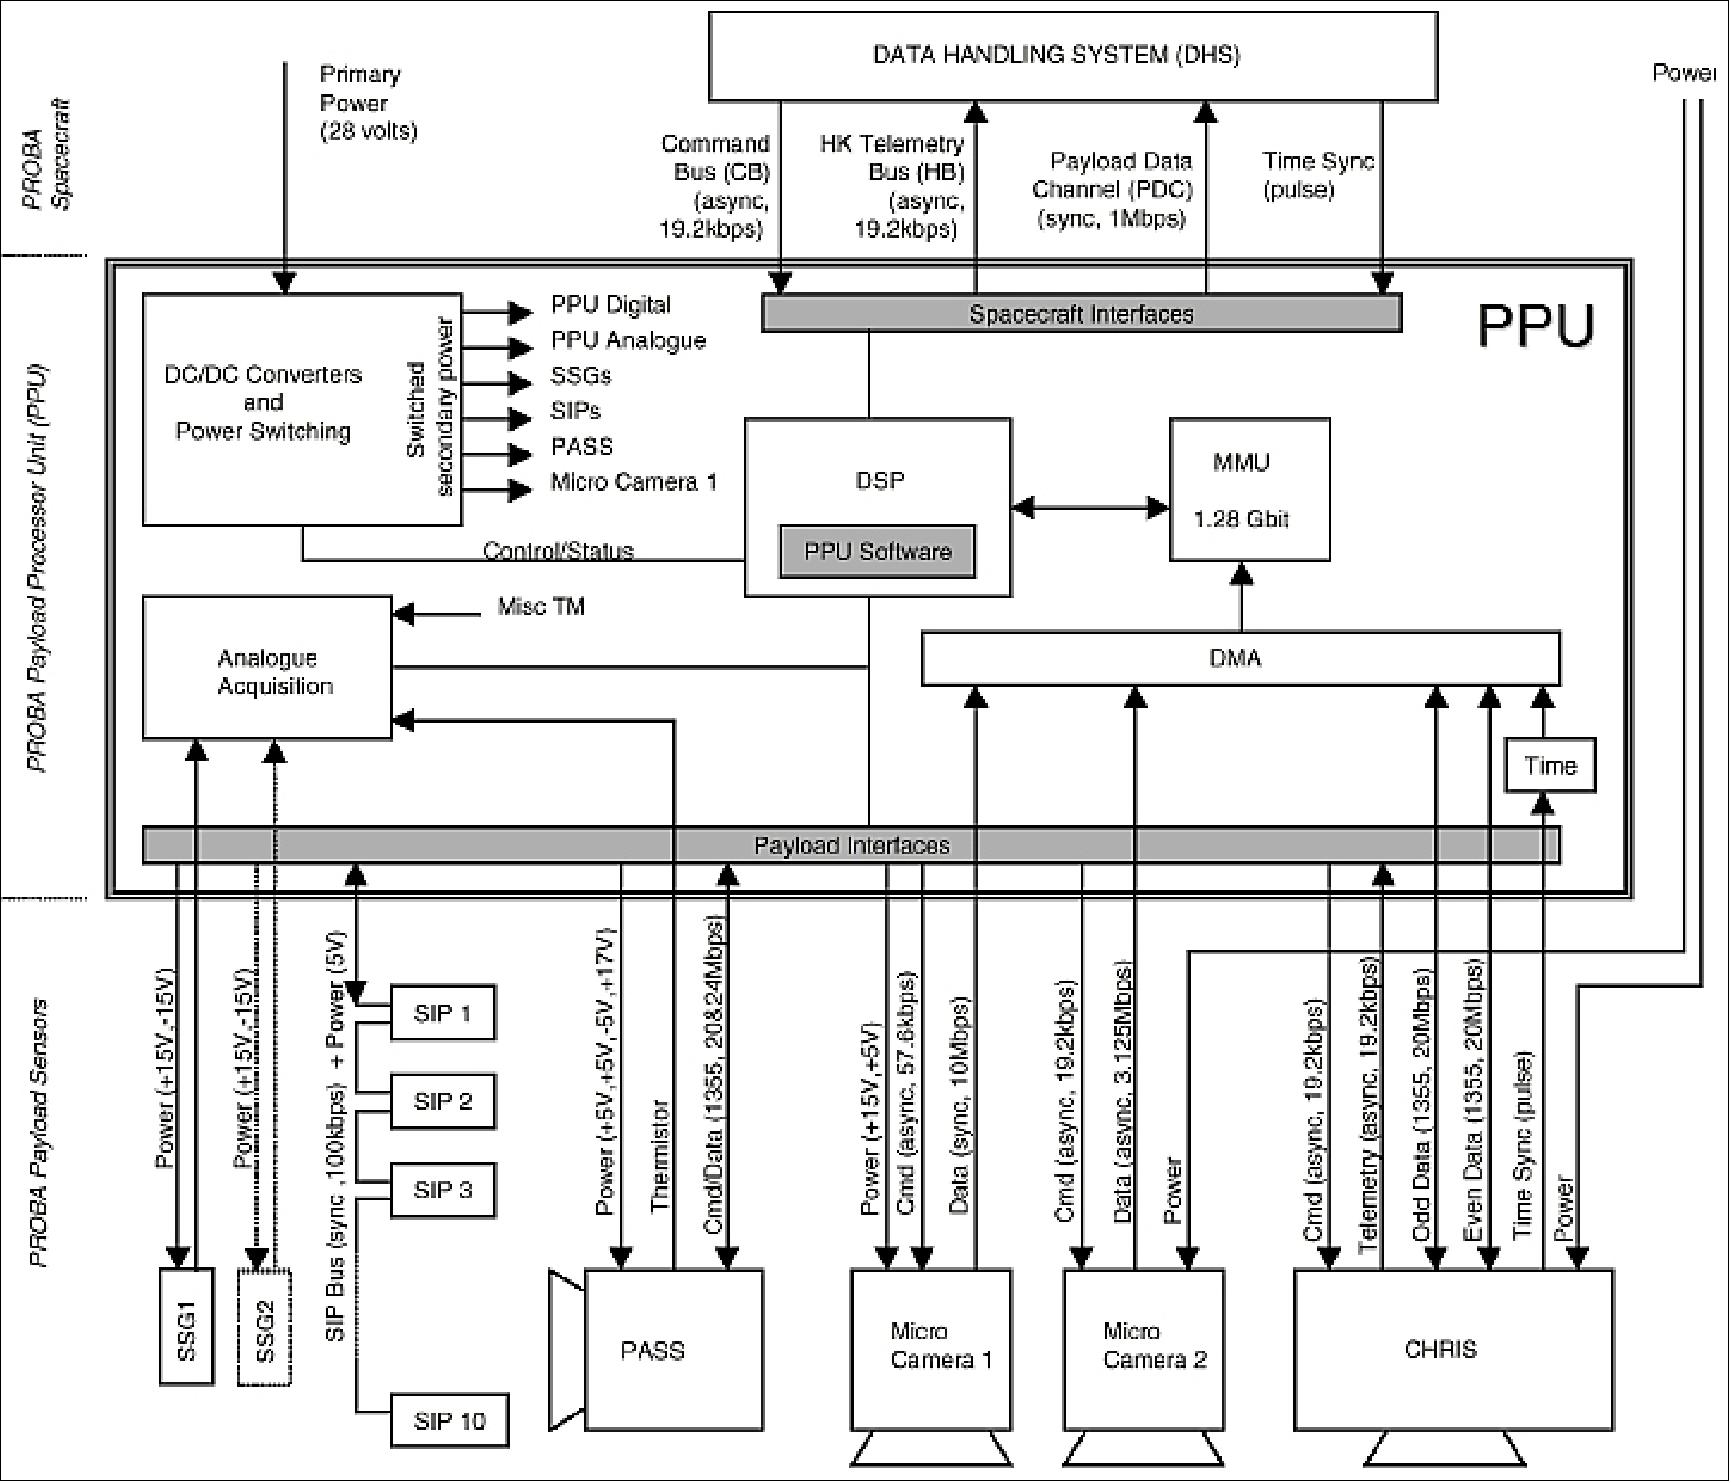 Figure 24: Block diagram of the PPU and attached payloads (image credit: ESA)